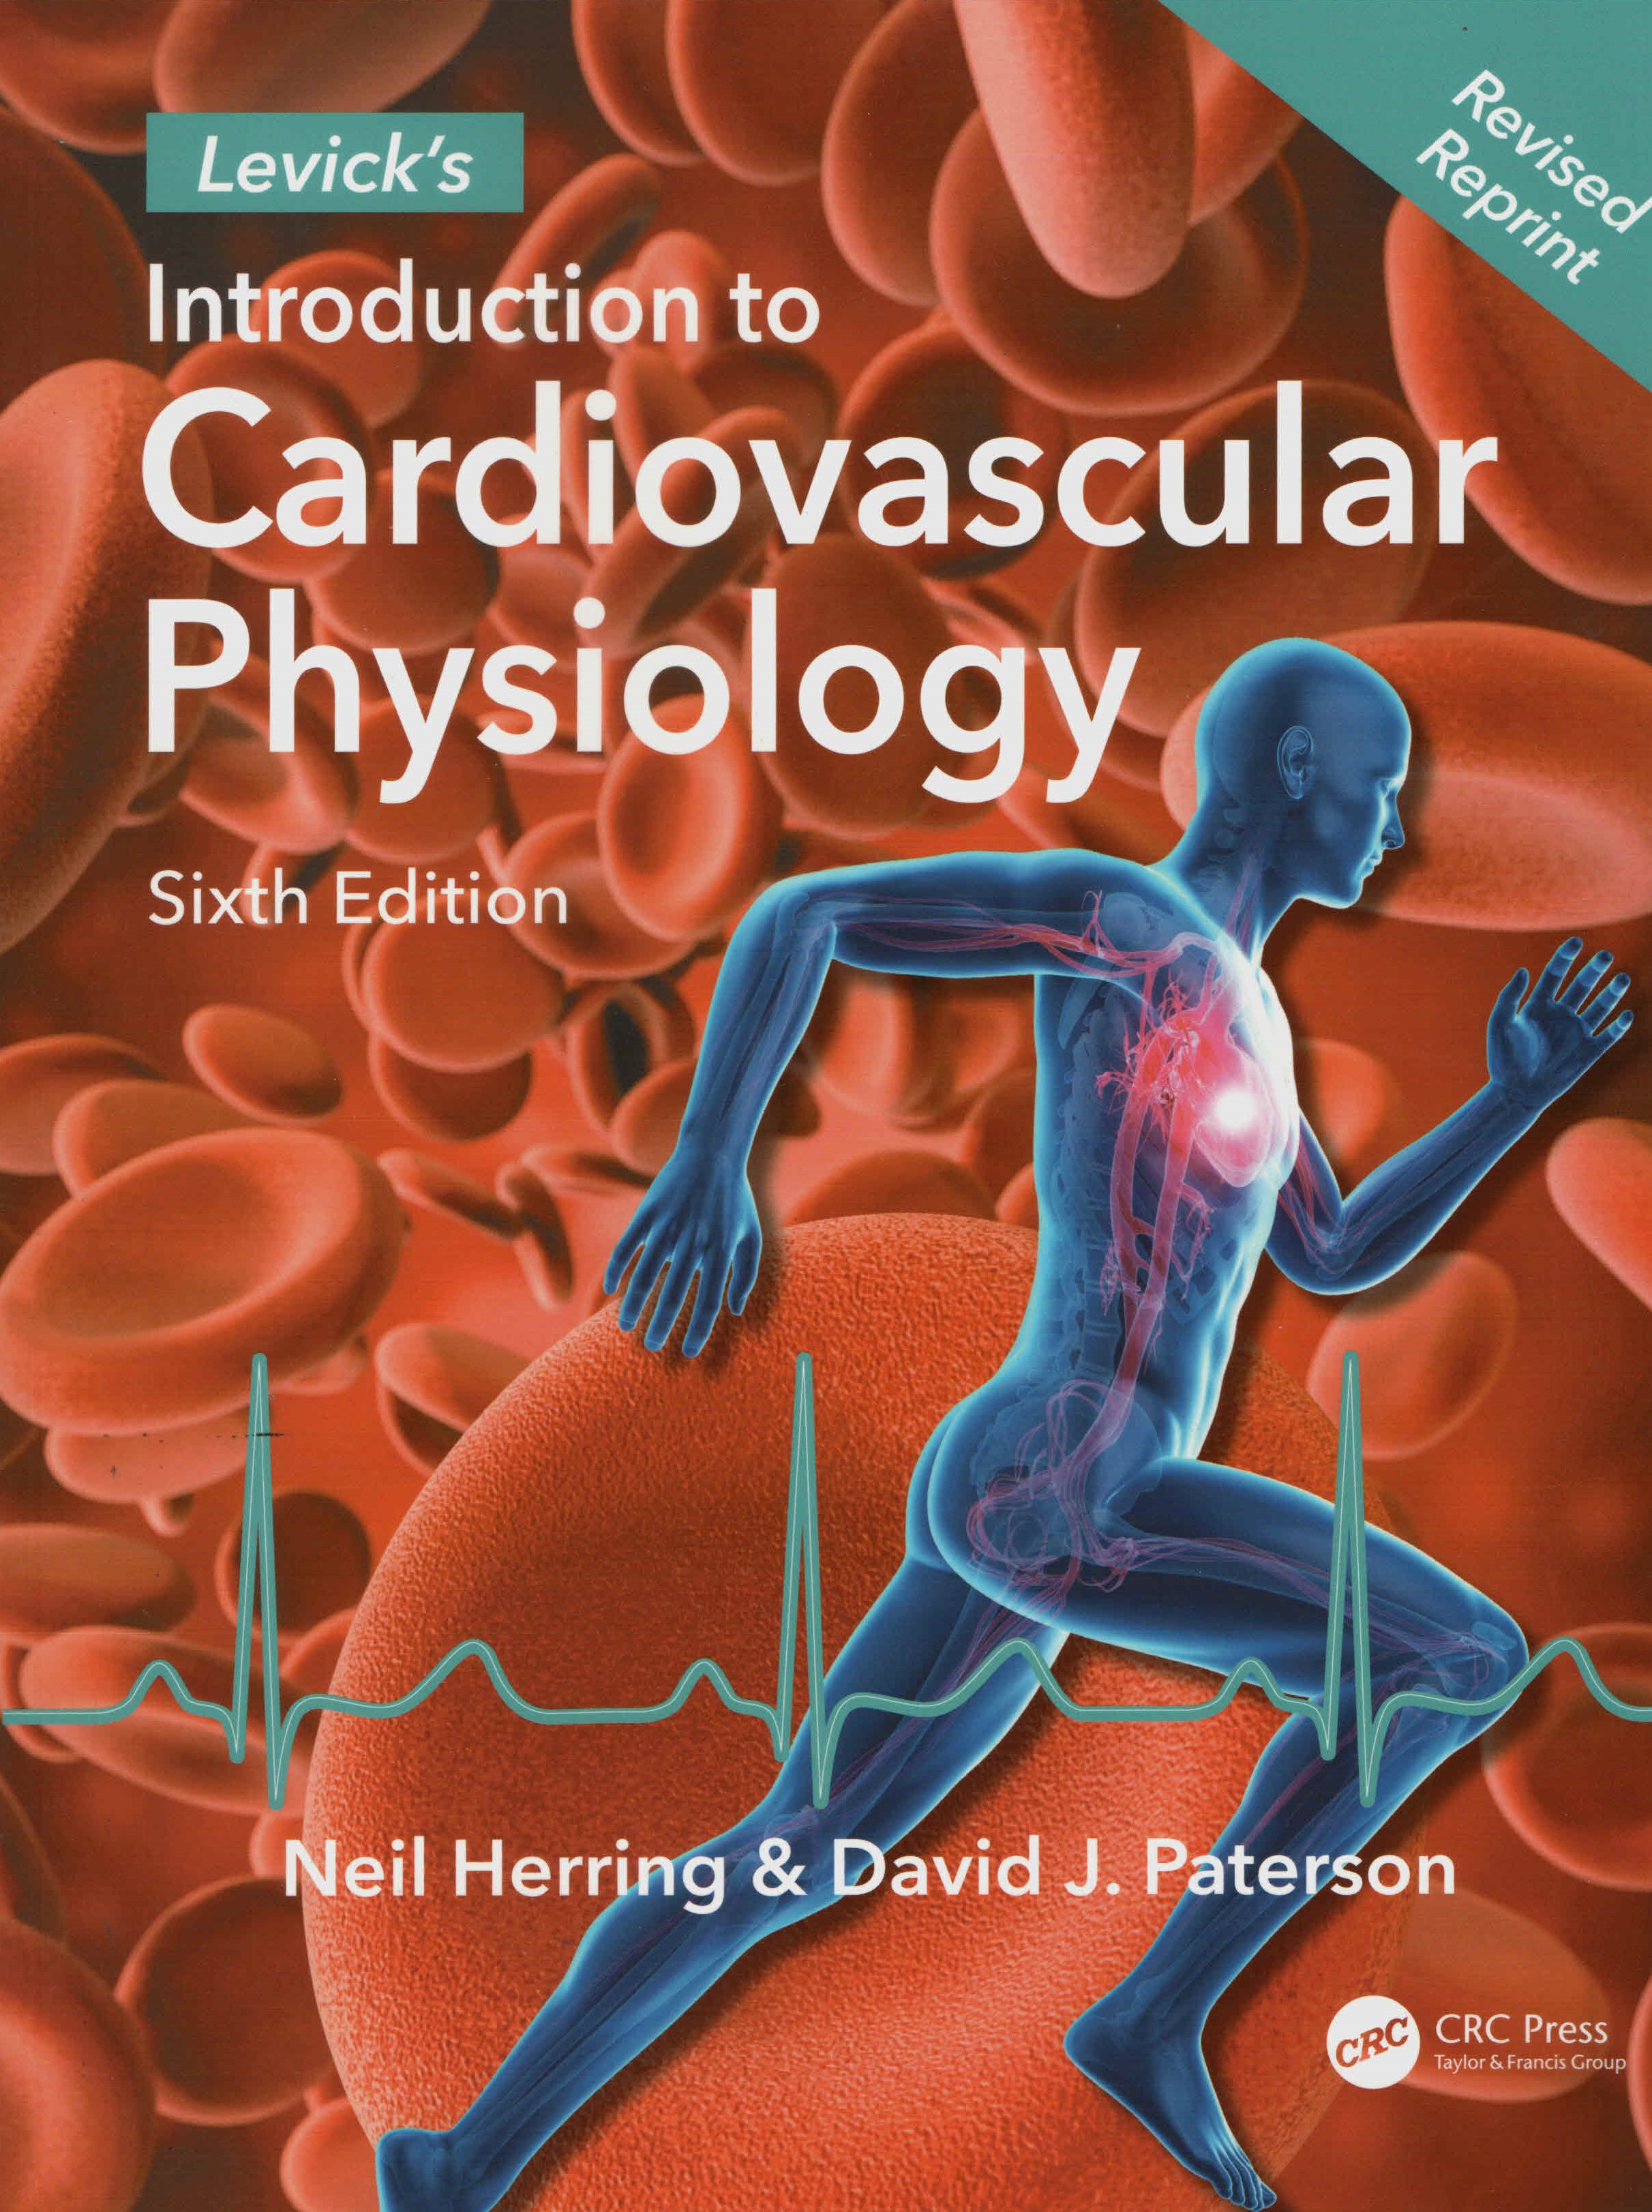 LEVICK'S INTRODUCTION TO CARDIOVASCULAR PHYSIOLOGY